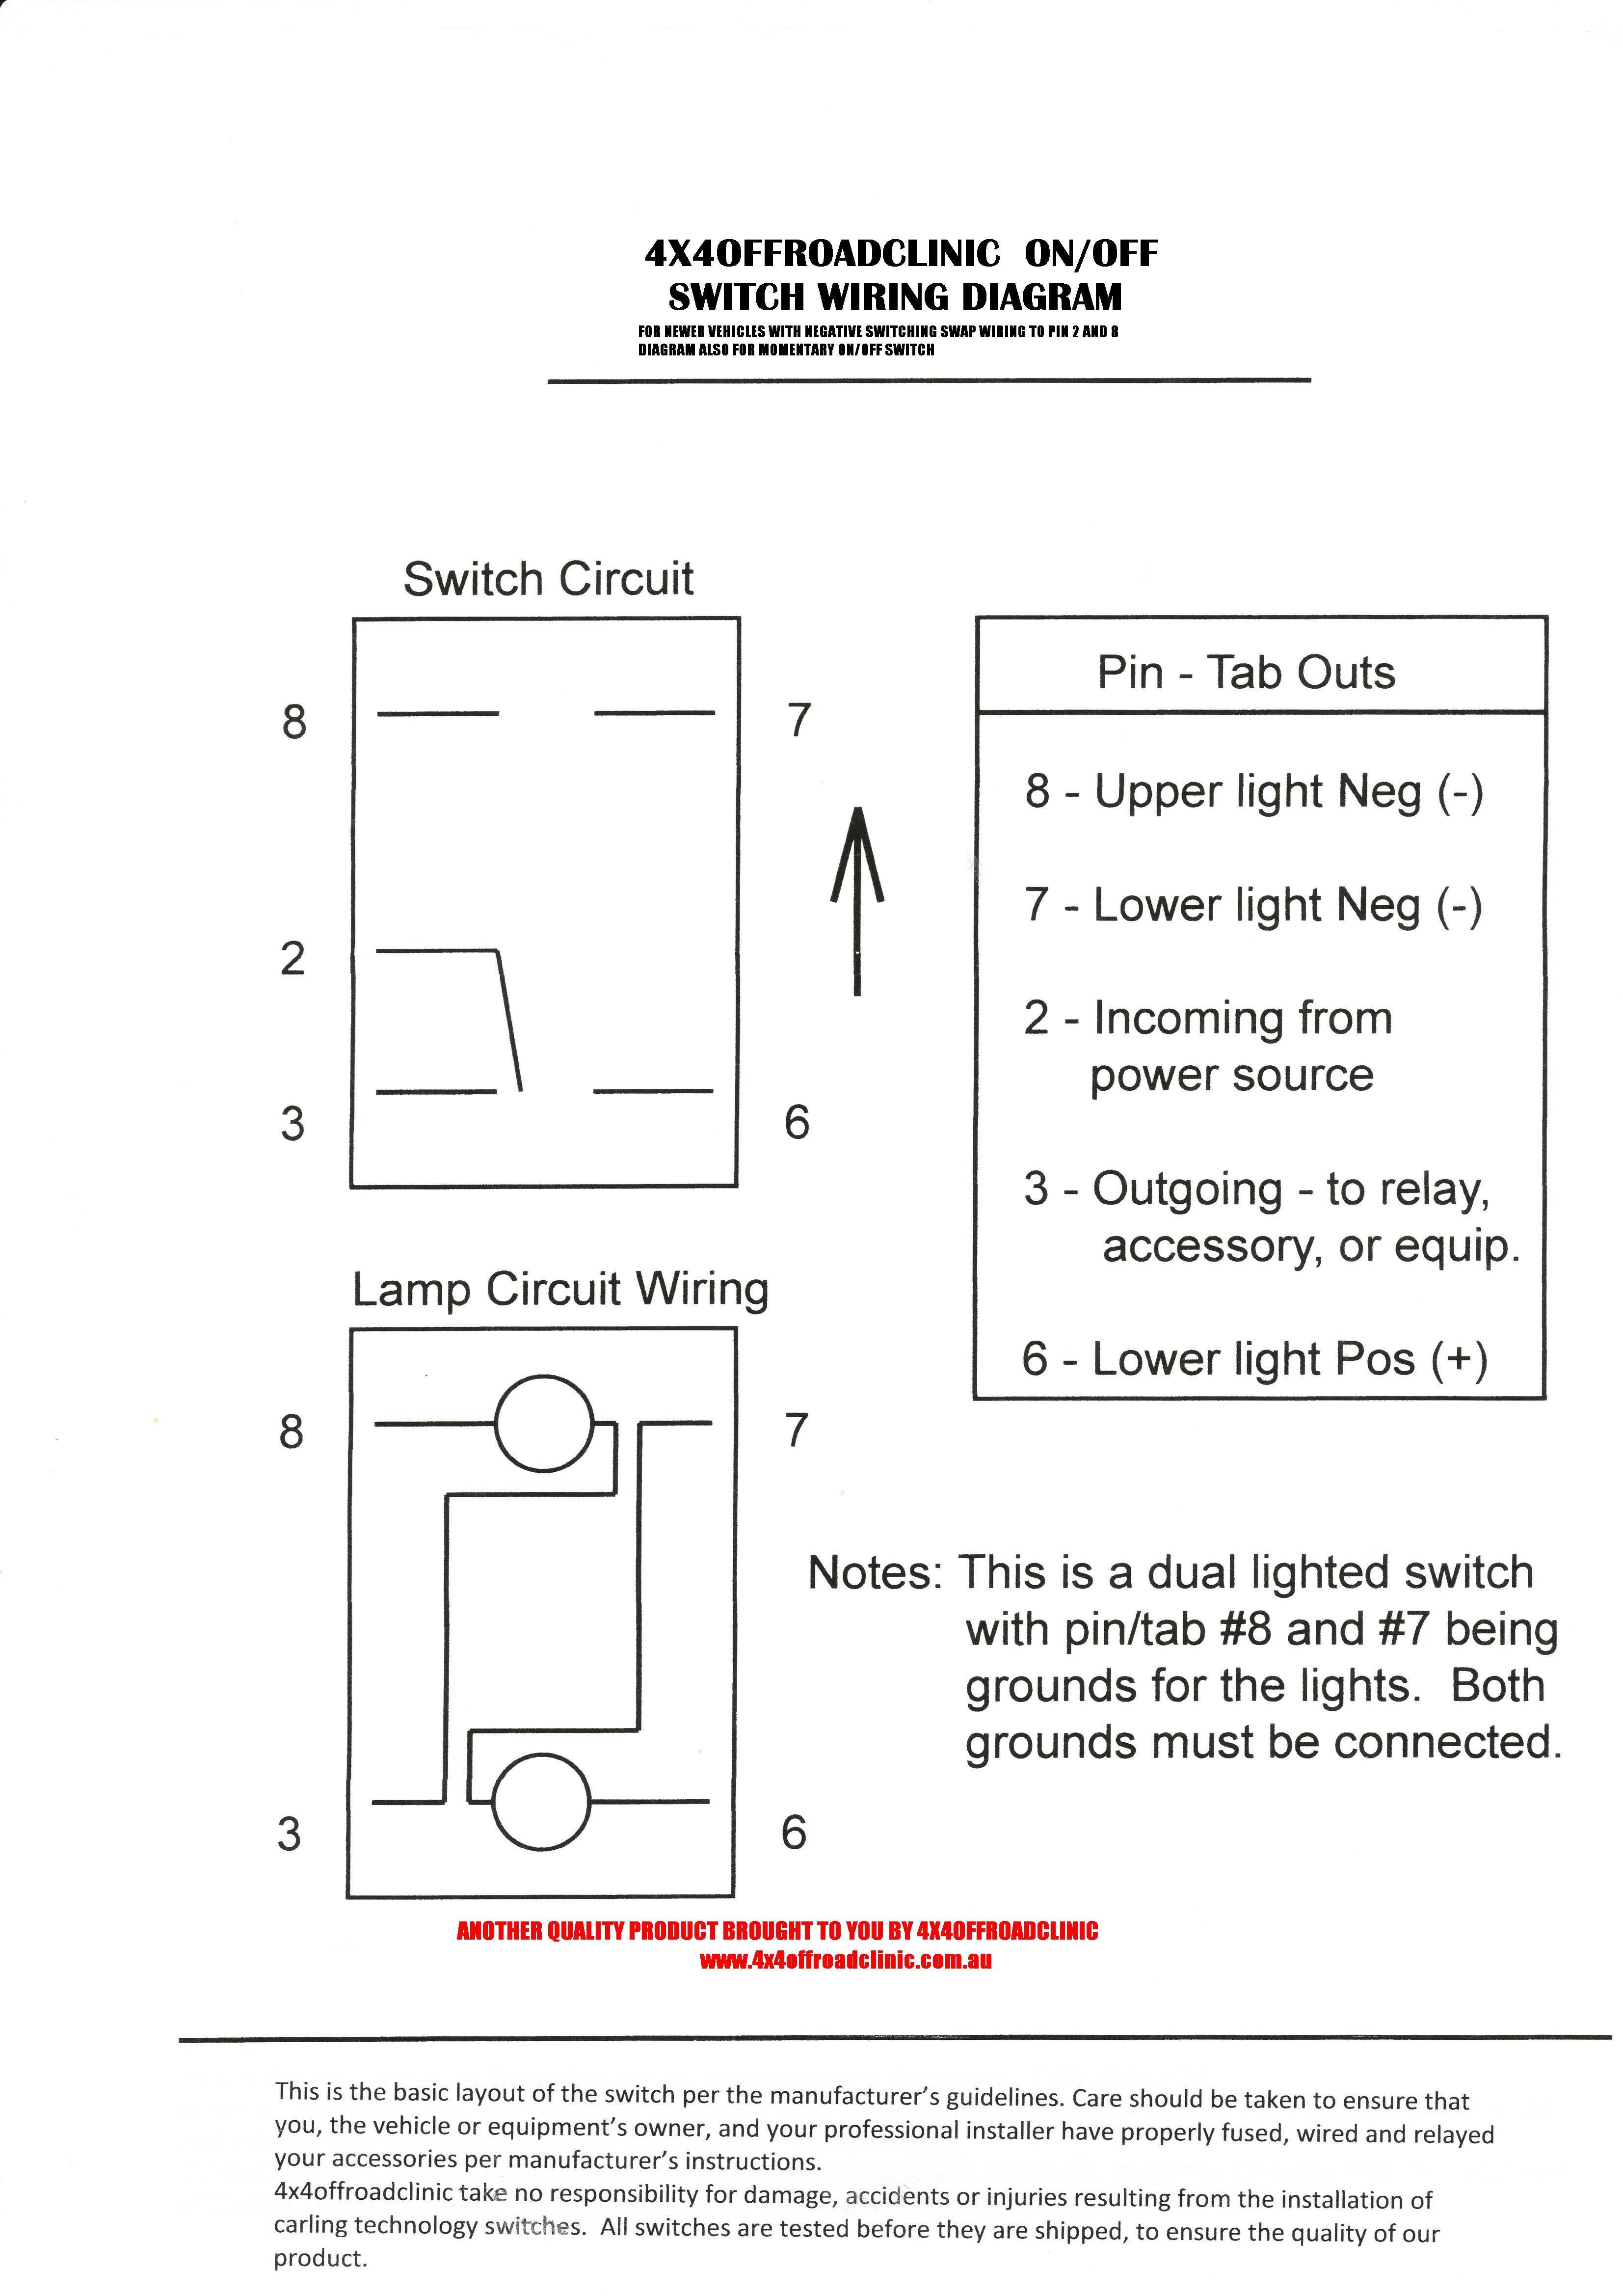 Lighted Rocker Switch Wiring Diagram 120v Awesome Carling Switch Wiring Diagrams Fresh Wiring Diagram Momentary Switch